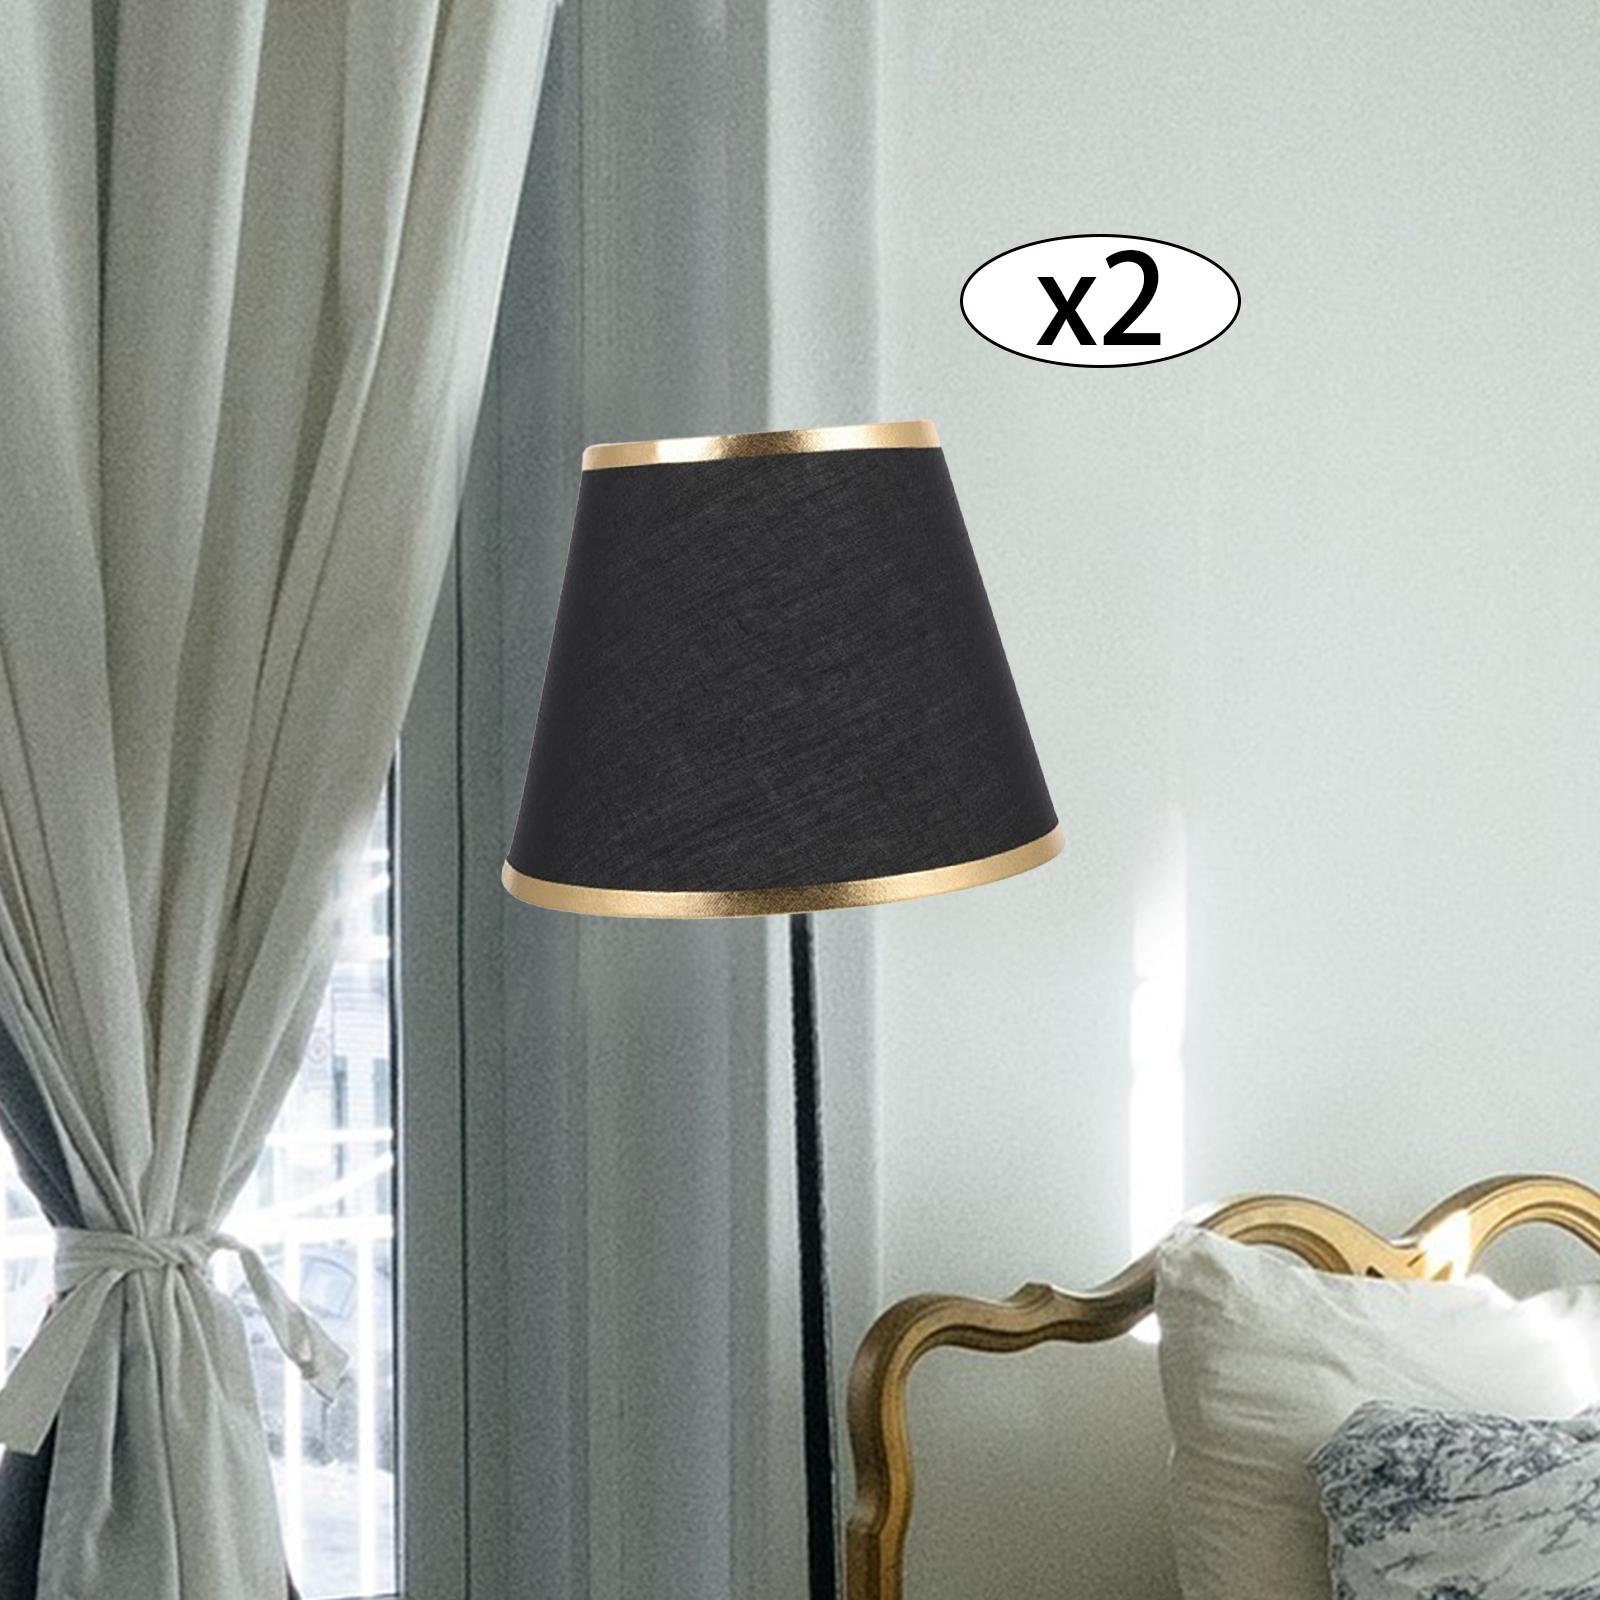 Imitation Cloth Lamp Shade Hollow Out Clip On Hanging Light Lamp Cover Black